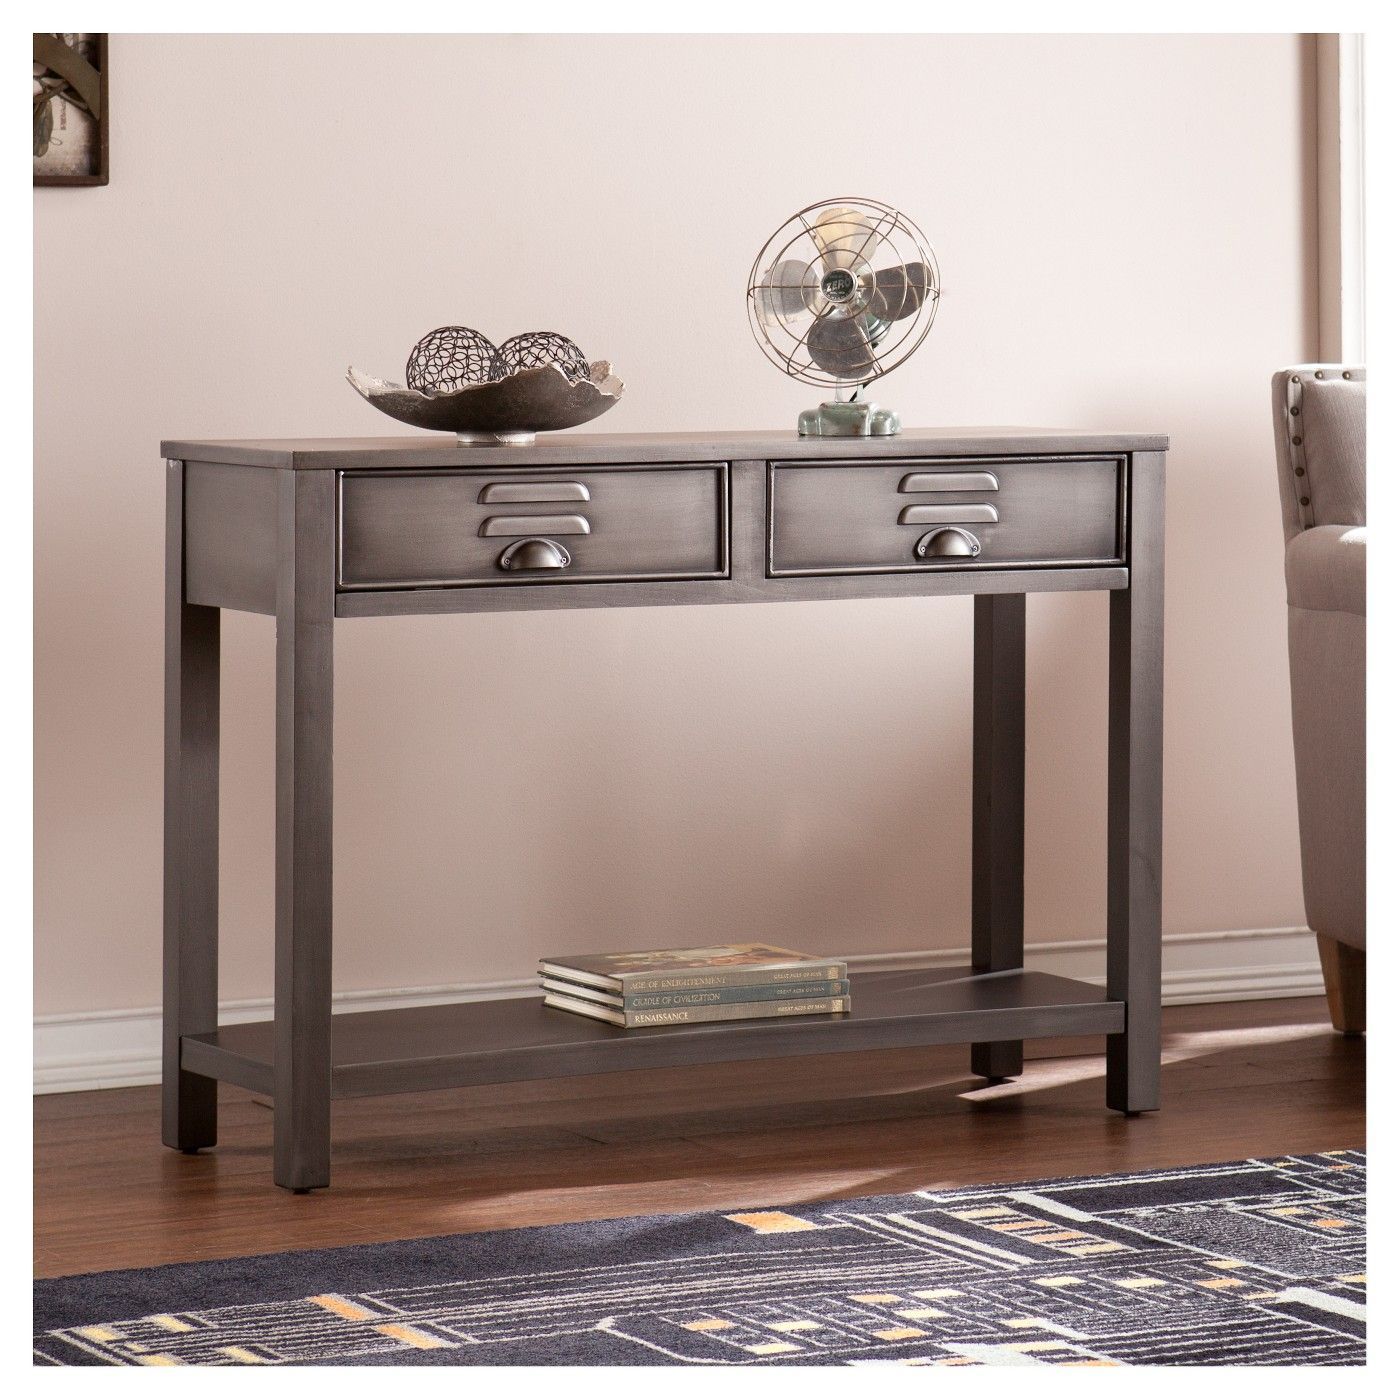 Gallagher Metal Console Table – Gray – Aiden Lane – Image 2 Of 8 | Wohnung Throughout Gray Driftwood And Metal Console Tables (View 6 of 20)